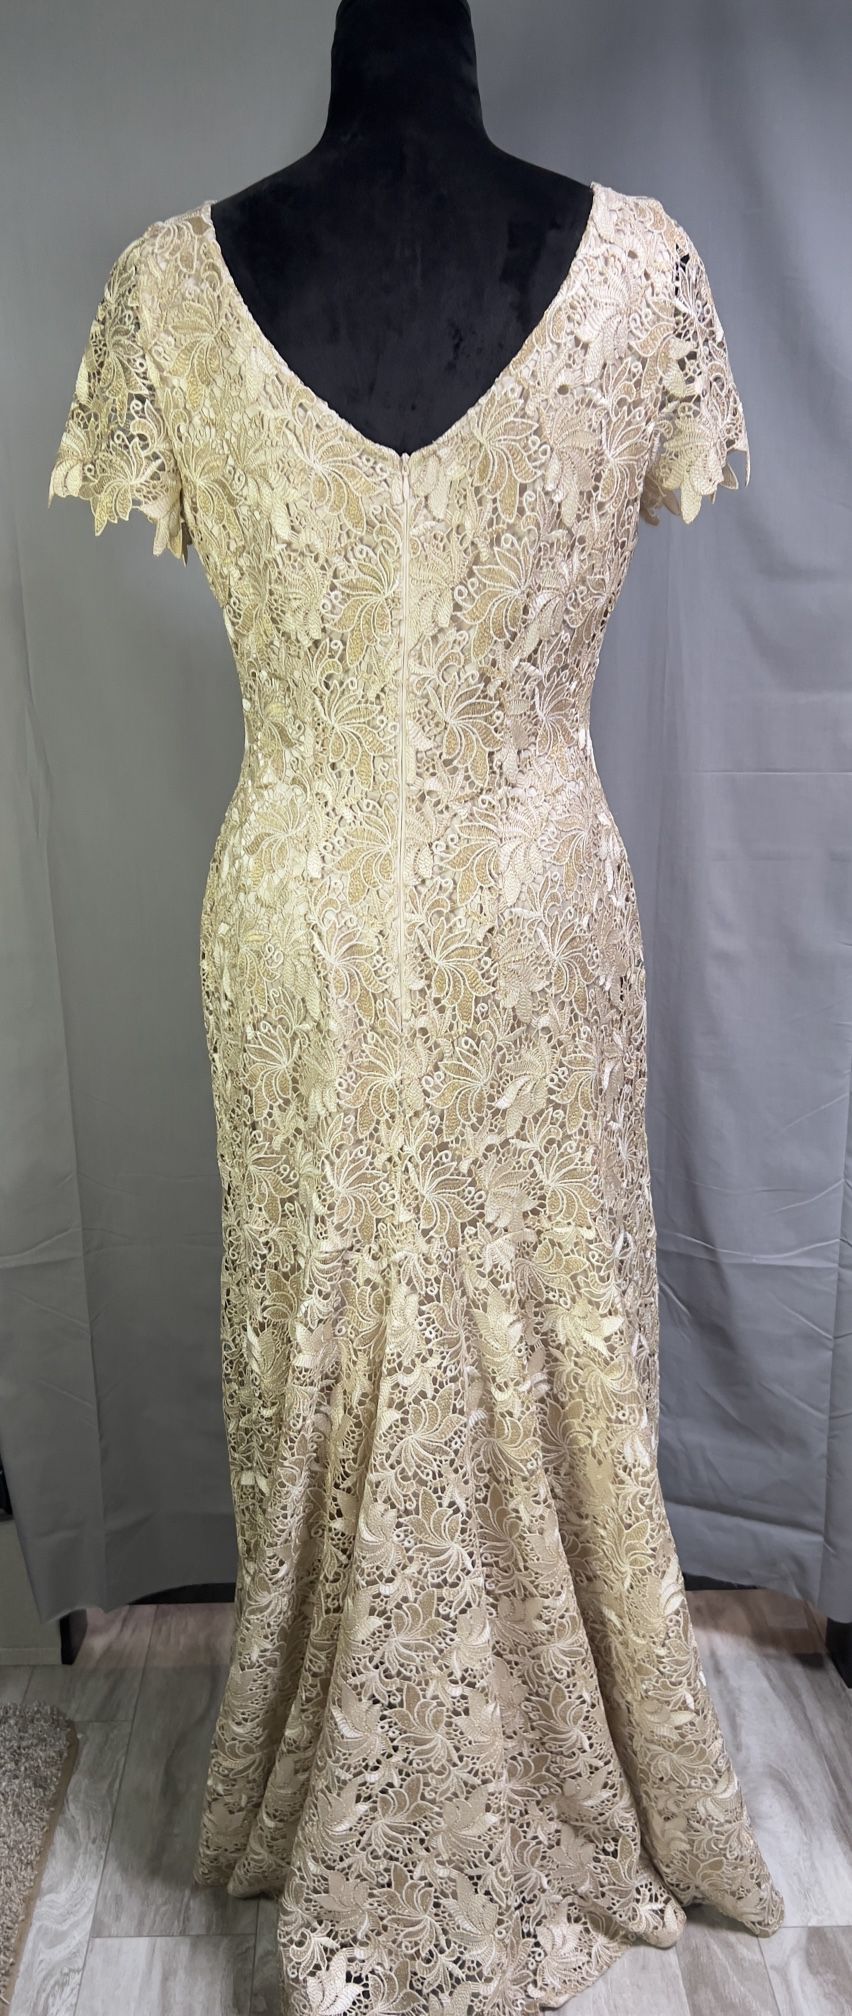 Tahari by Arthur S. Levine Gold Embroidered Evening Gown Size 8 Mermaid Lace